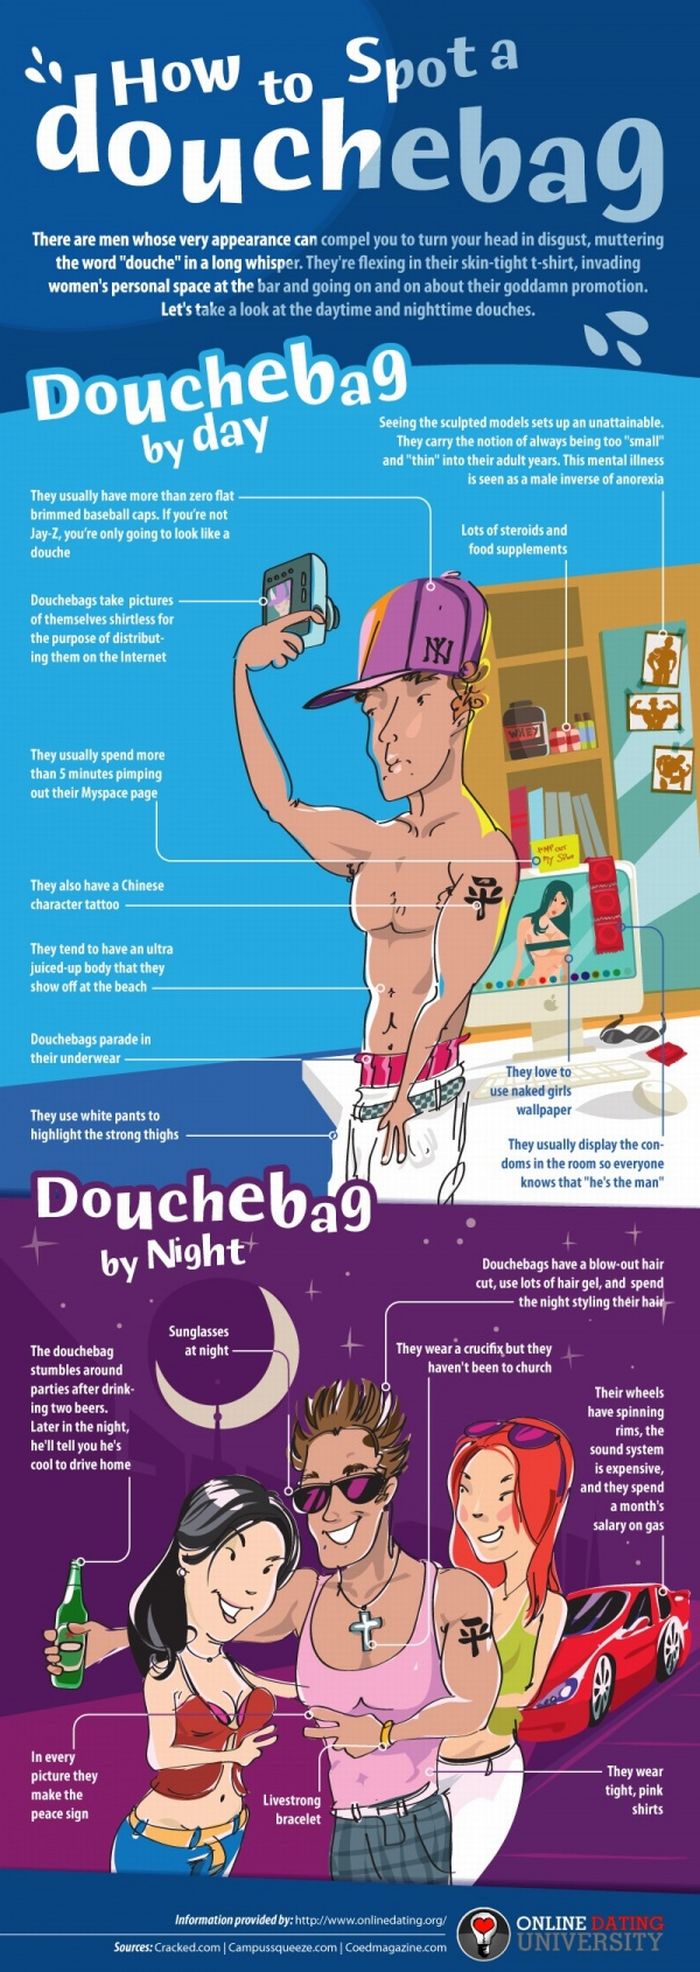 How To Spot A Douchebag (Infographic)